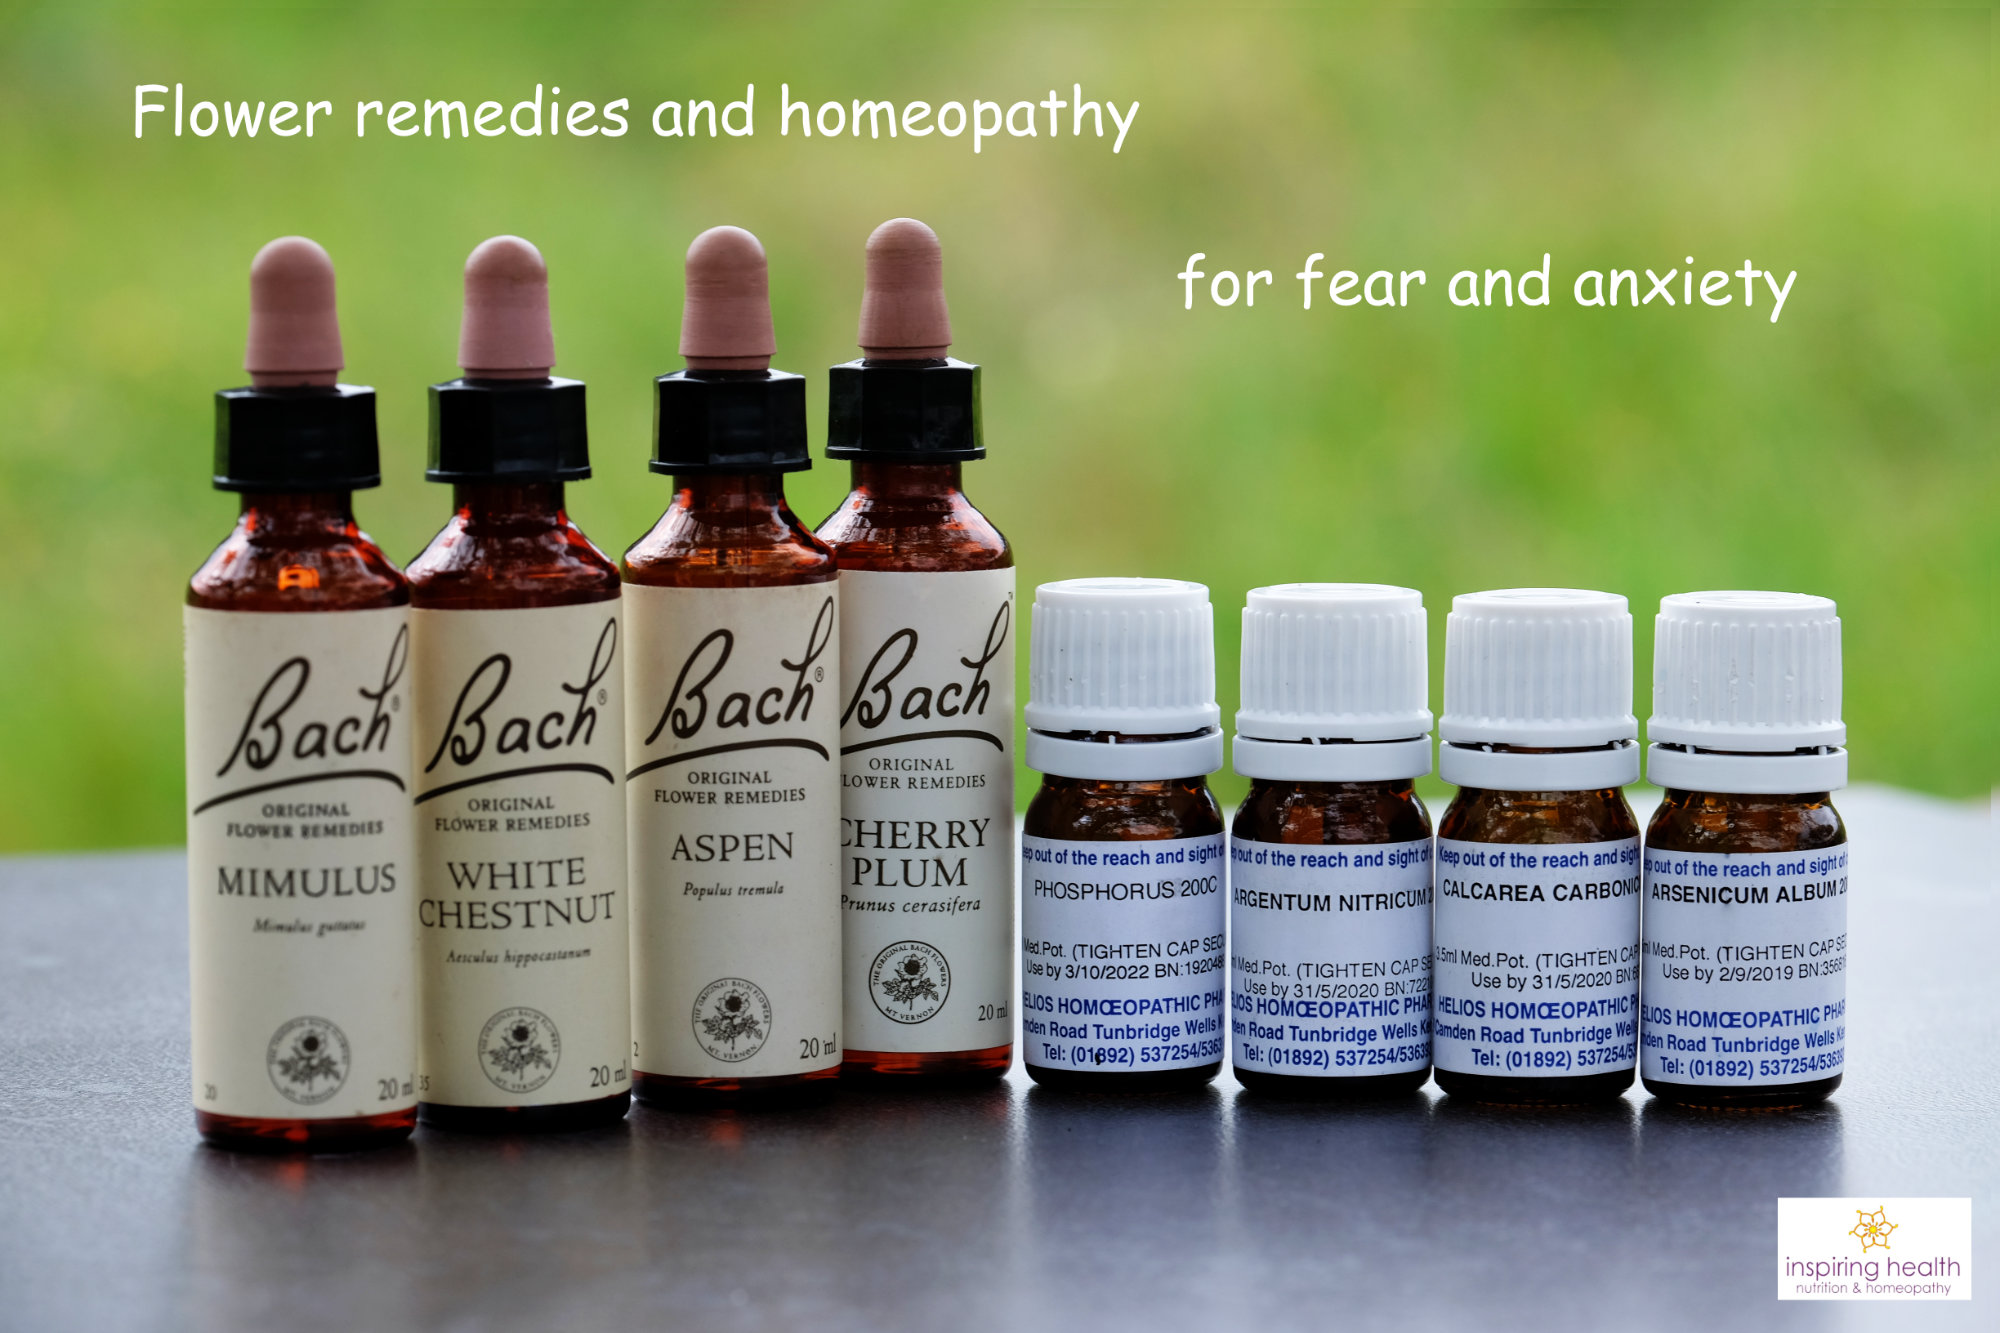 COVID-19 Homeopathy & Flower Remedies for Frear & Anxiety